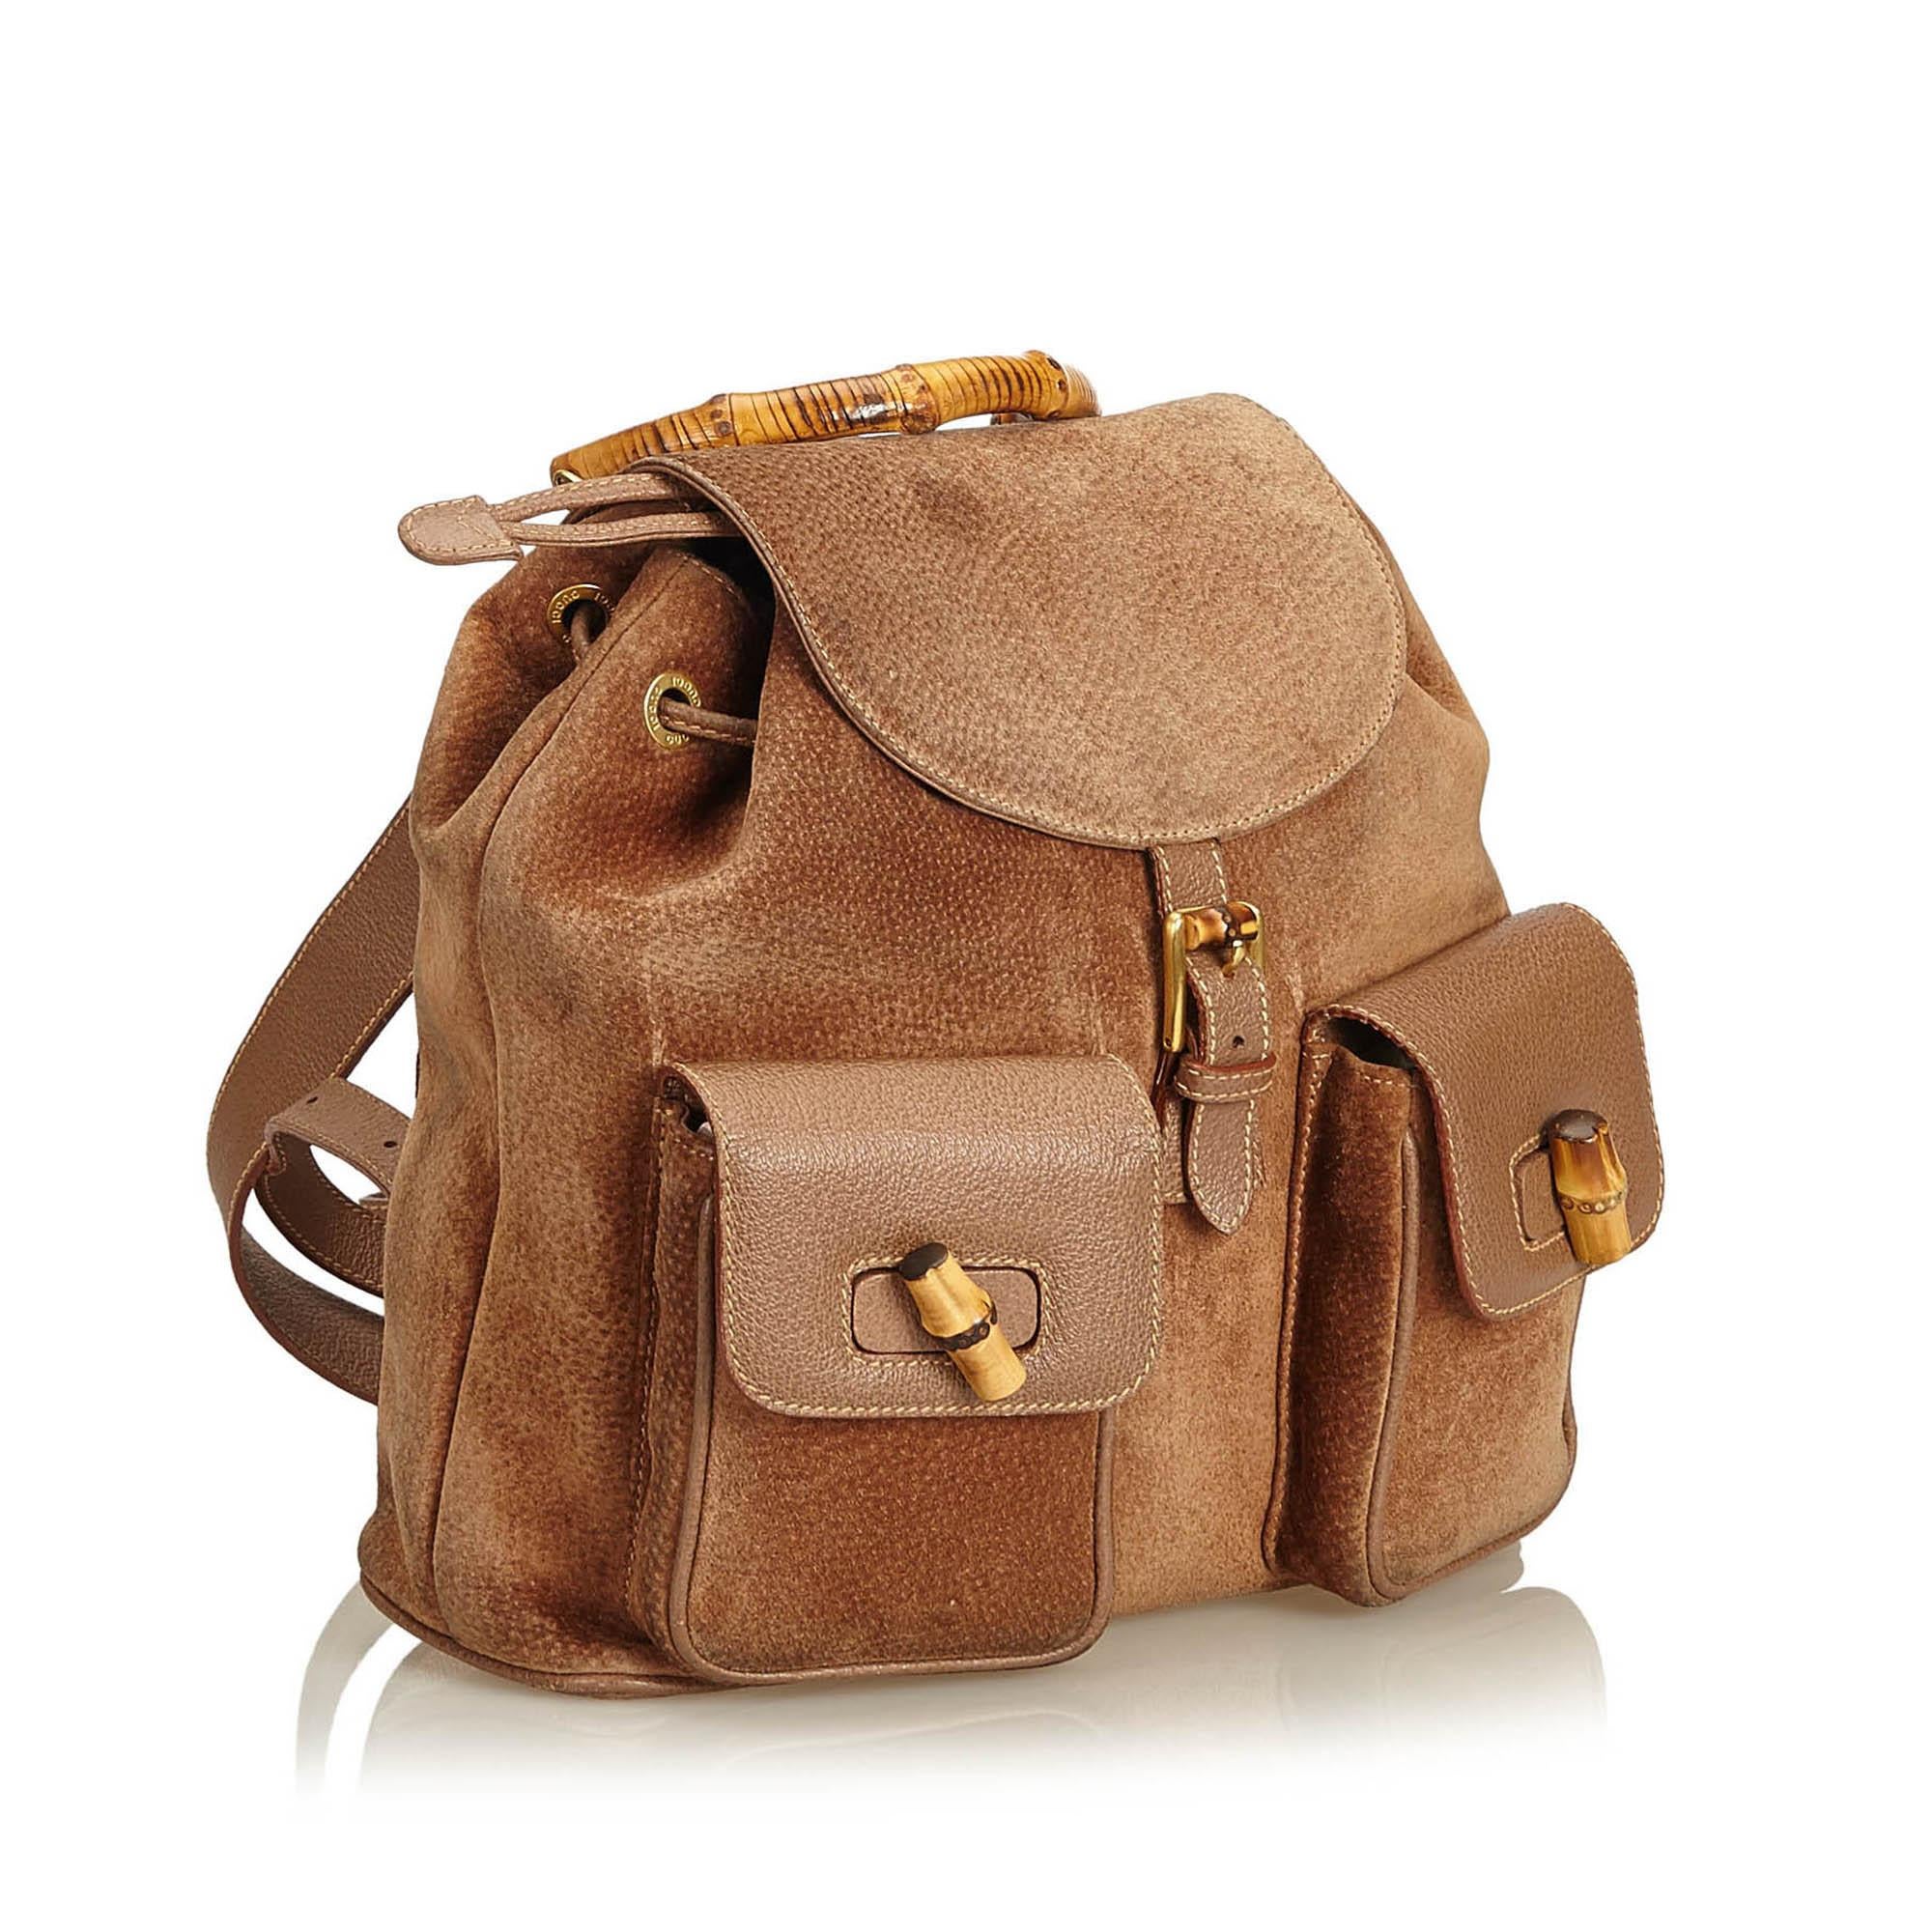 This backpack features a suede body, flat leather back straps, bamboo top handle, top flap with magnetic closure, drawstring closure, exterior flap pockets with bamboo twist lock closure, and an interior zip pocket.

It carries a B condition